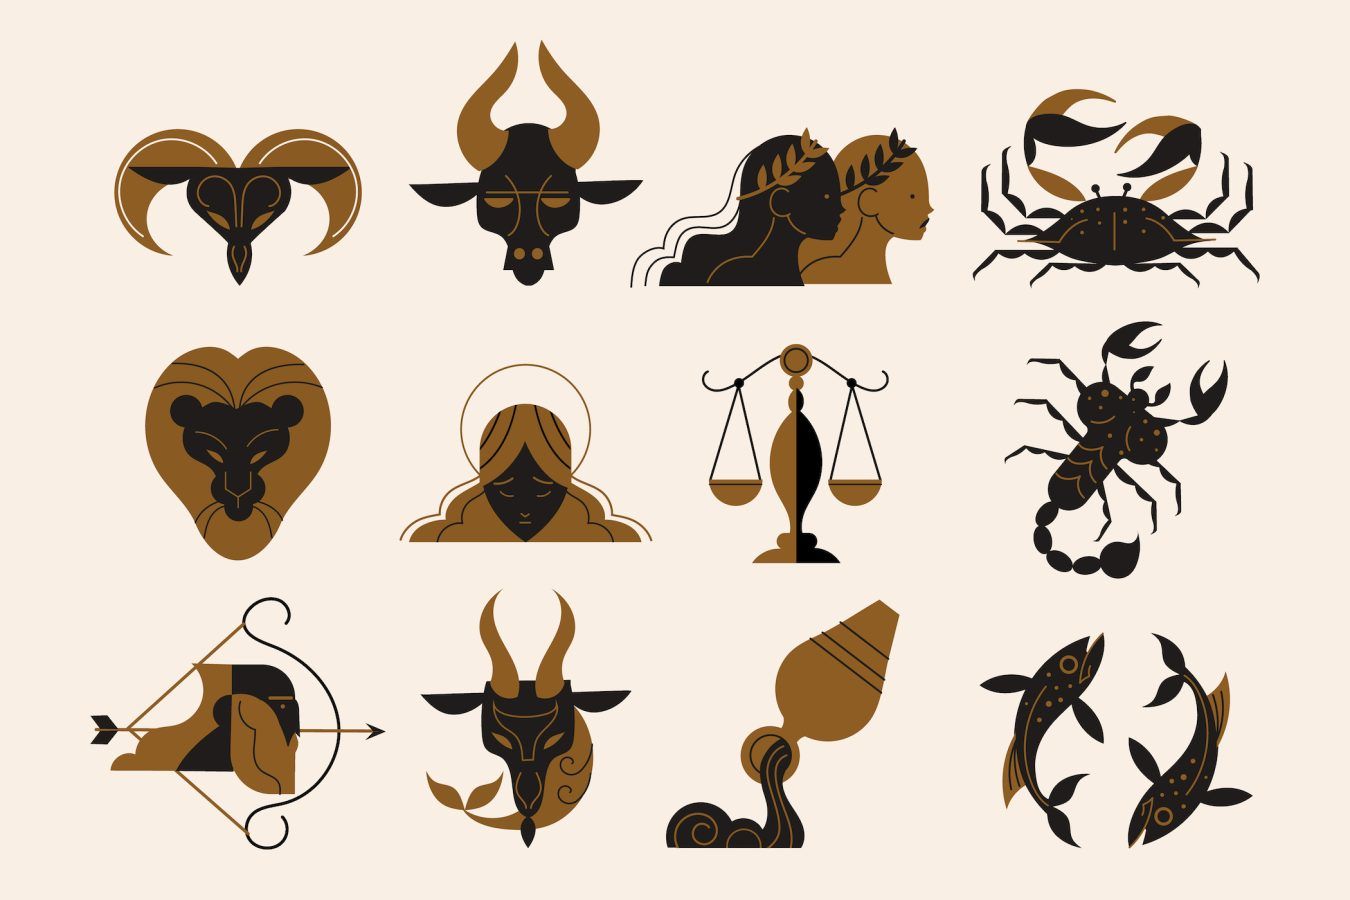 The most matured zodiac signs and their maturity levels